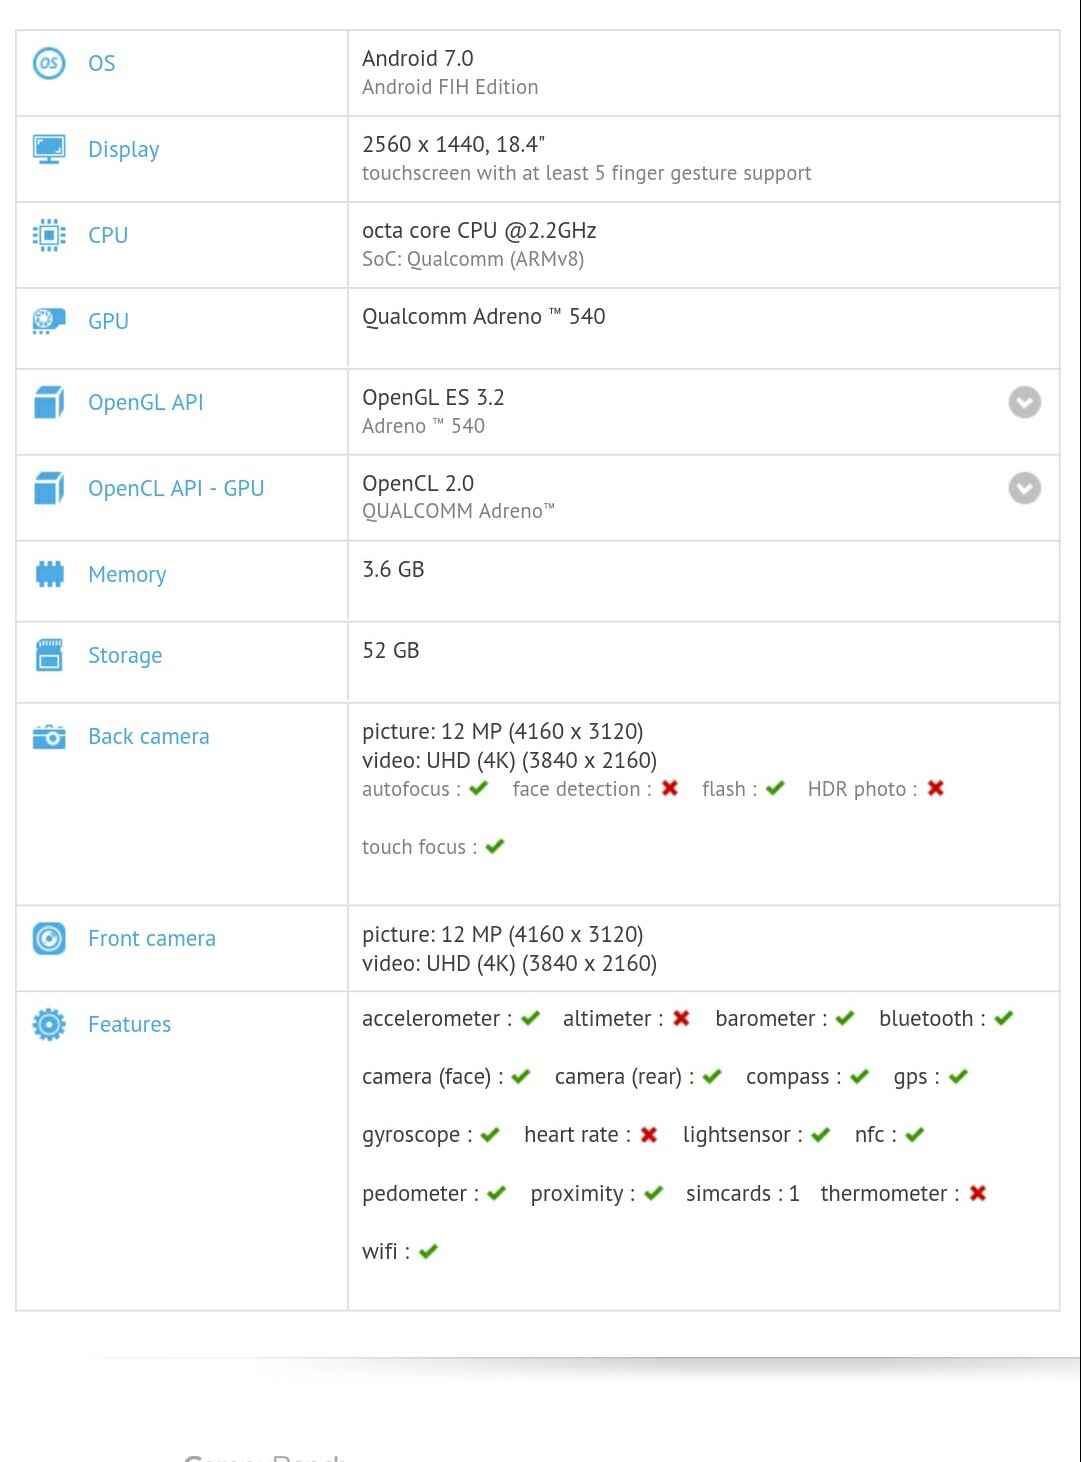 Nokia tablet listing on GFXBench